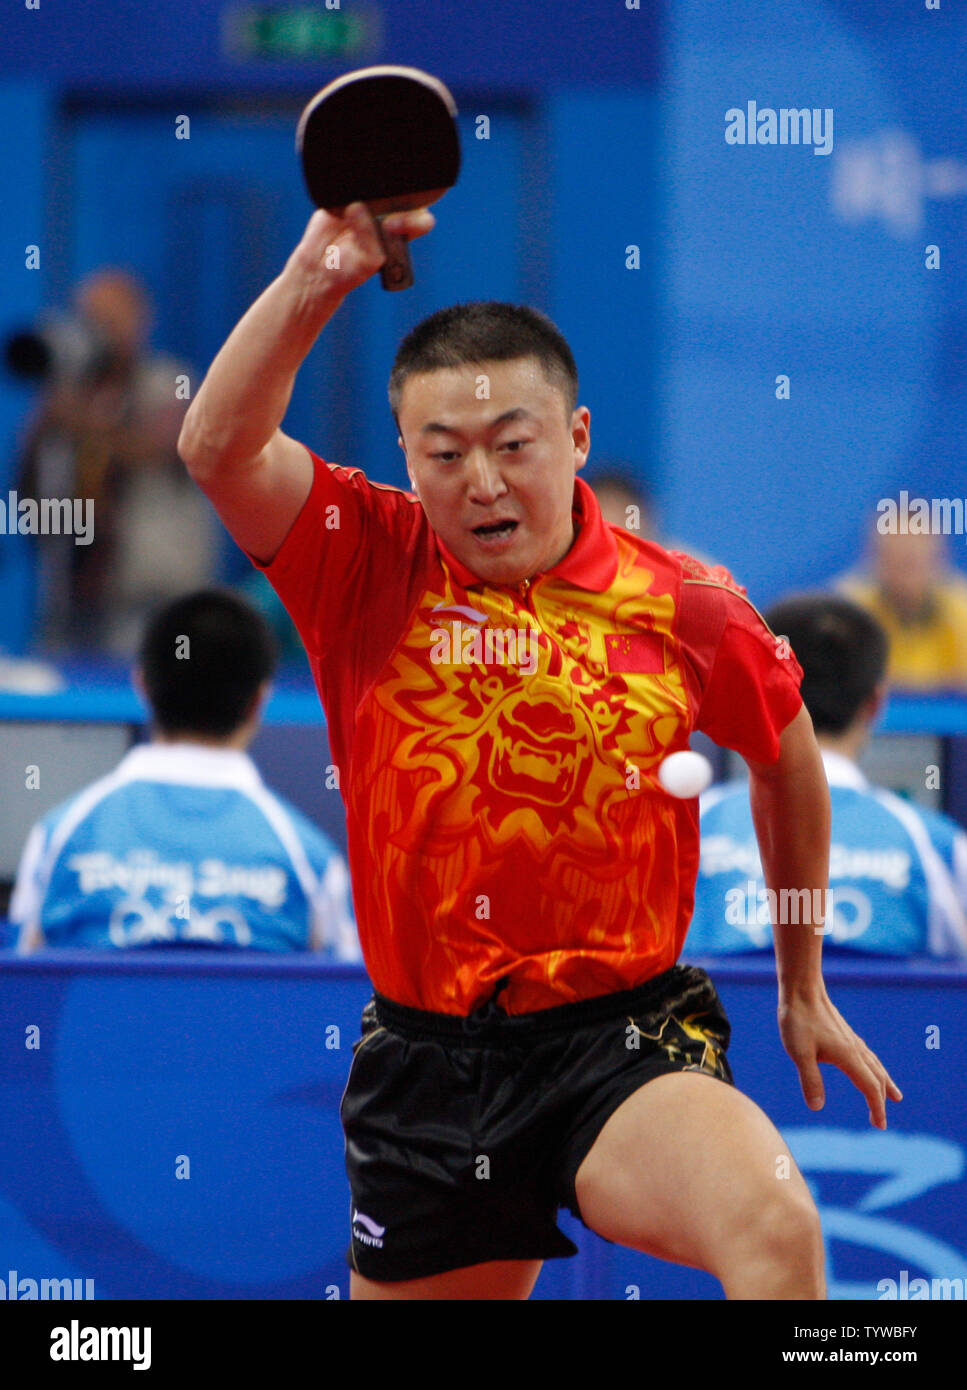 Ma Lin of China volleys with Panagiotis Gionis of Greece in the first round of Table Tennis eliminations in Beijing on August 13, 2008. Lin defeated Gionis.  (UPI Photo/Terry Schmitt) Stock Photo